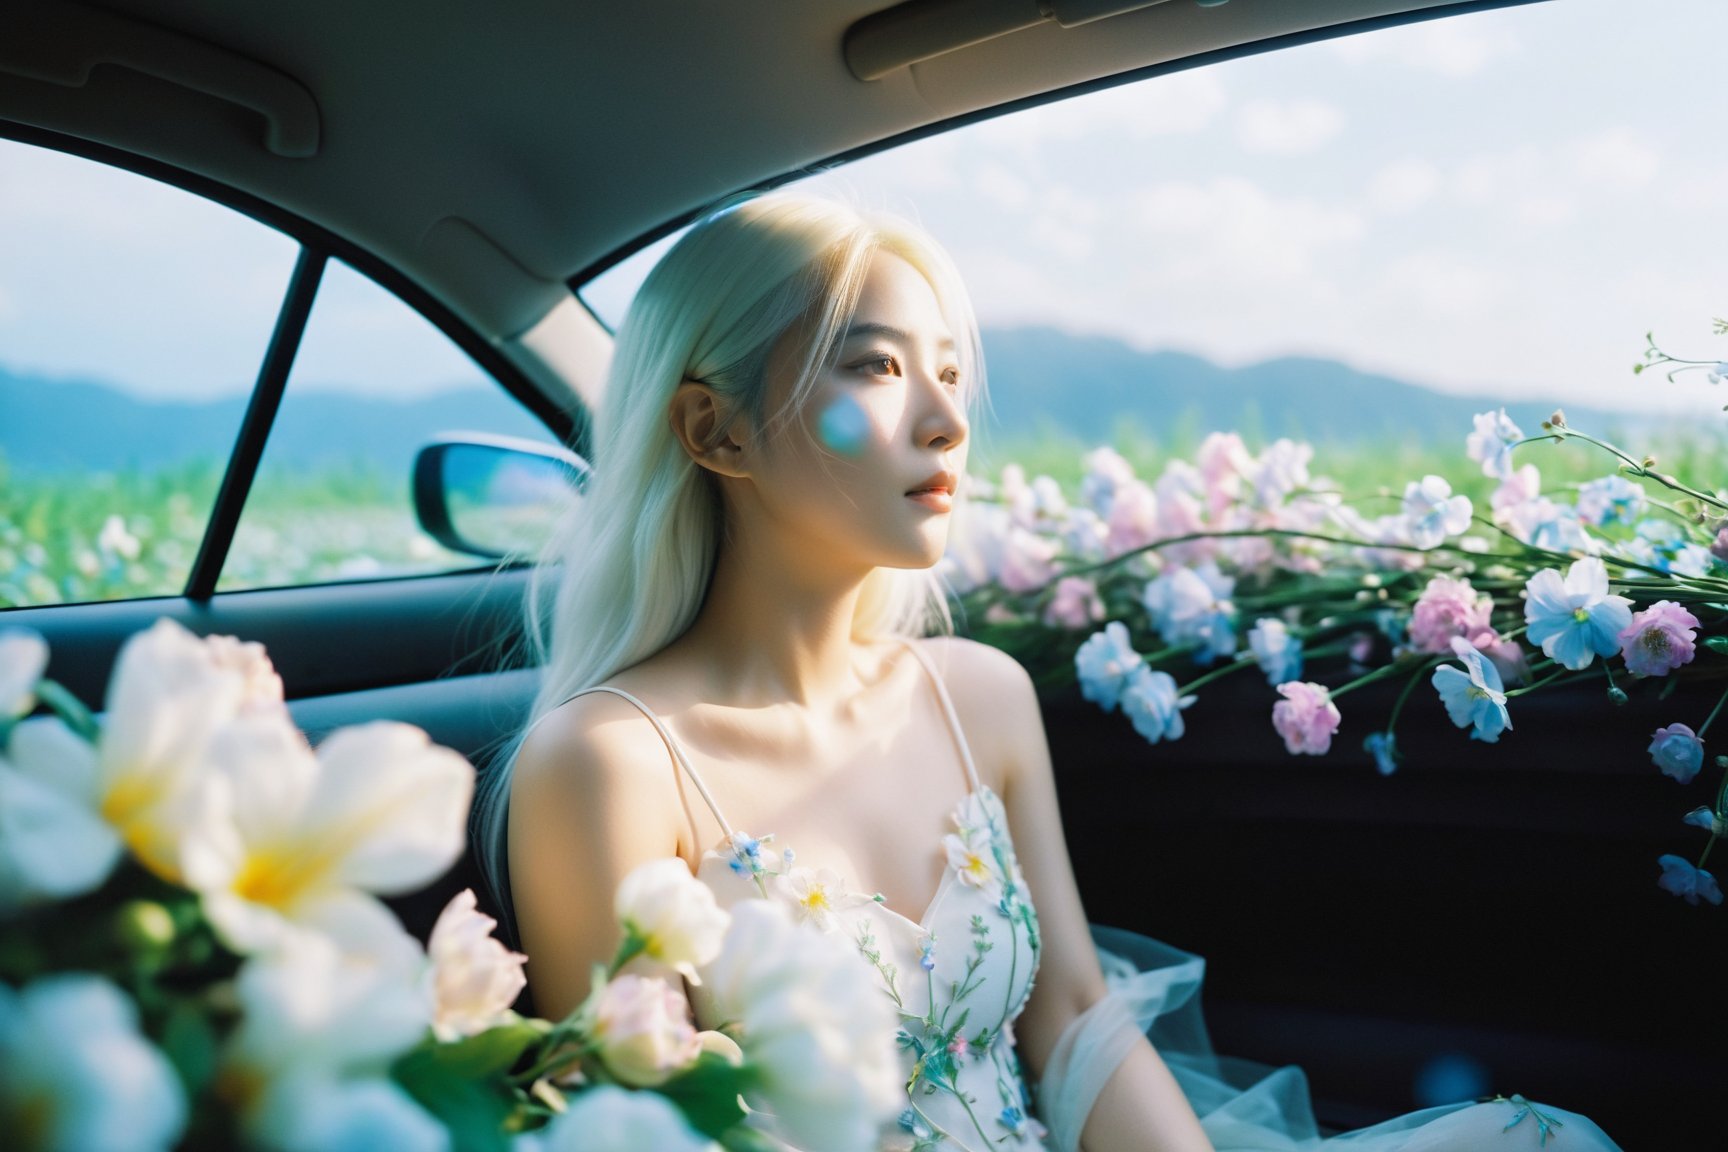  breathtaking ethereal fantasy concept art of cinematic film still,chinese girl,a girl with white hair sitting in car filled with flowers,art by Rinko Kawauchi,in the style of naturalistic poses,vacation dadcore,youth fulenergy,a cool expression,body extensions,flowersin the sky,****og film,super detail,dreamy lofi photography,colourful,covered in flowers andvines,Inside view,shot on fujifilm XT4 . shallow depth of field,vignette,highly detailed,high budget,bokeh,cinemascope,moody,epic,gorgeous,film grain,grainy . magnificent,celestial,ethereal,painterly,epic,majestic,magical,fantasy art,cover art,dreamy,monkren, . award-winning, professional, highly detailed, light master, monkren, sunlight